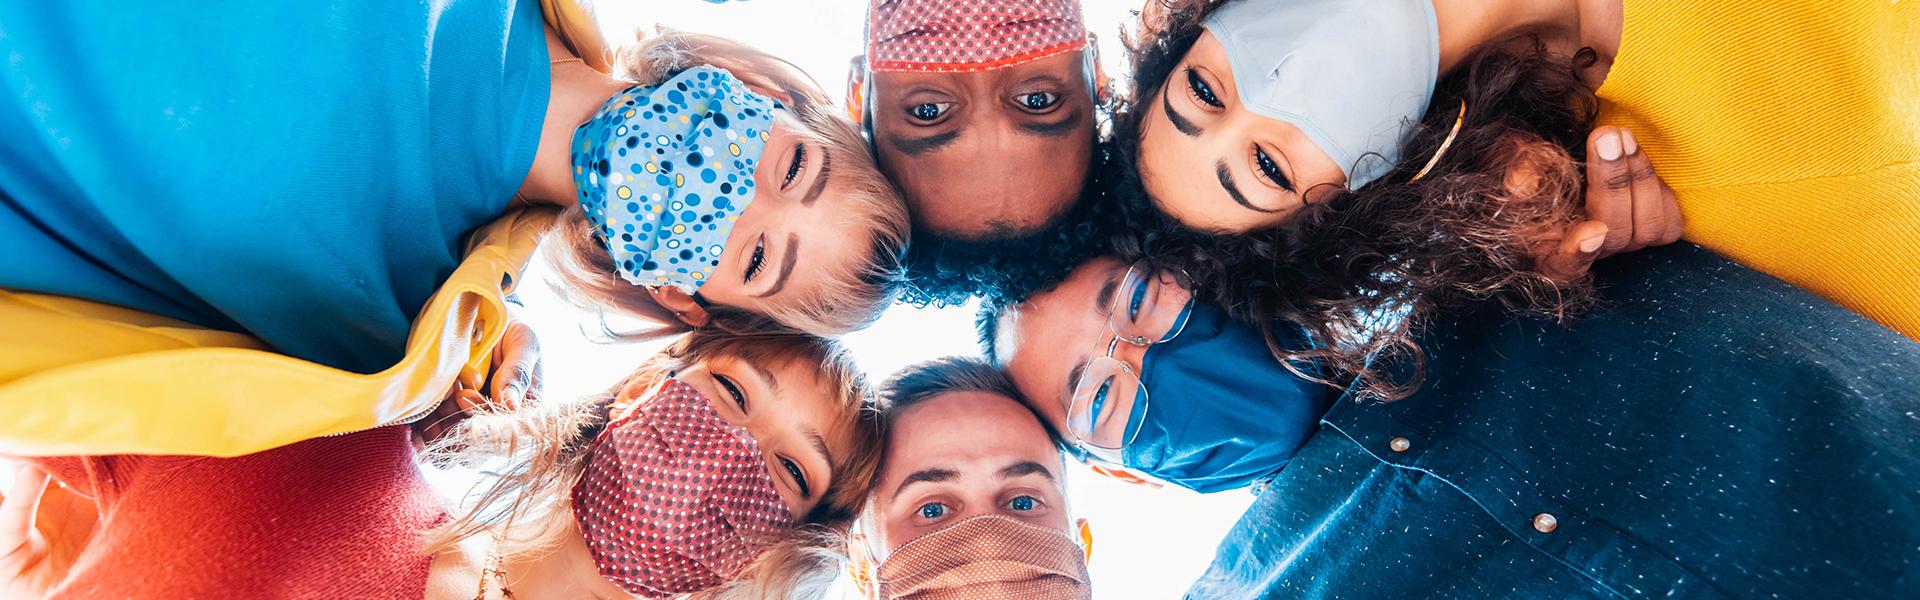 Multiracial group of friends wearing protective face masks taking a selfie - New normal friendship concept with young people looking down at camera and laughing